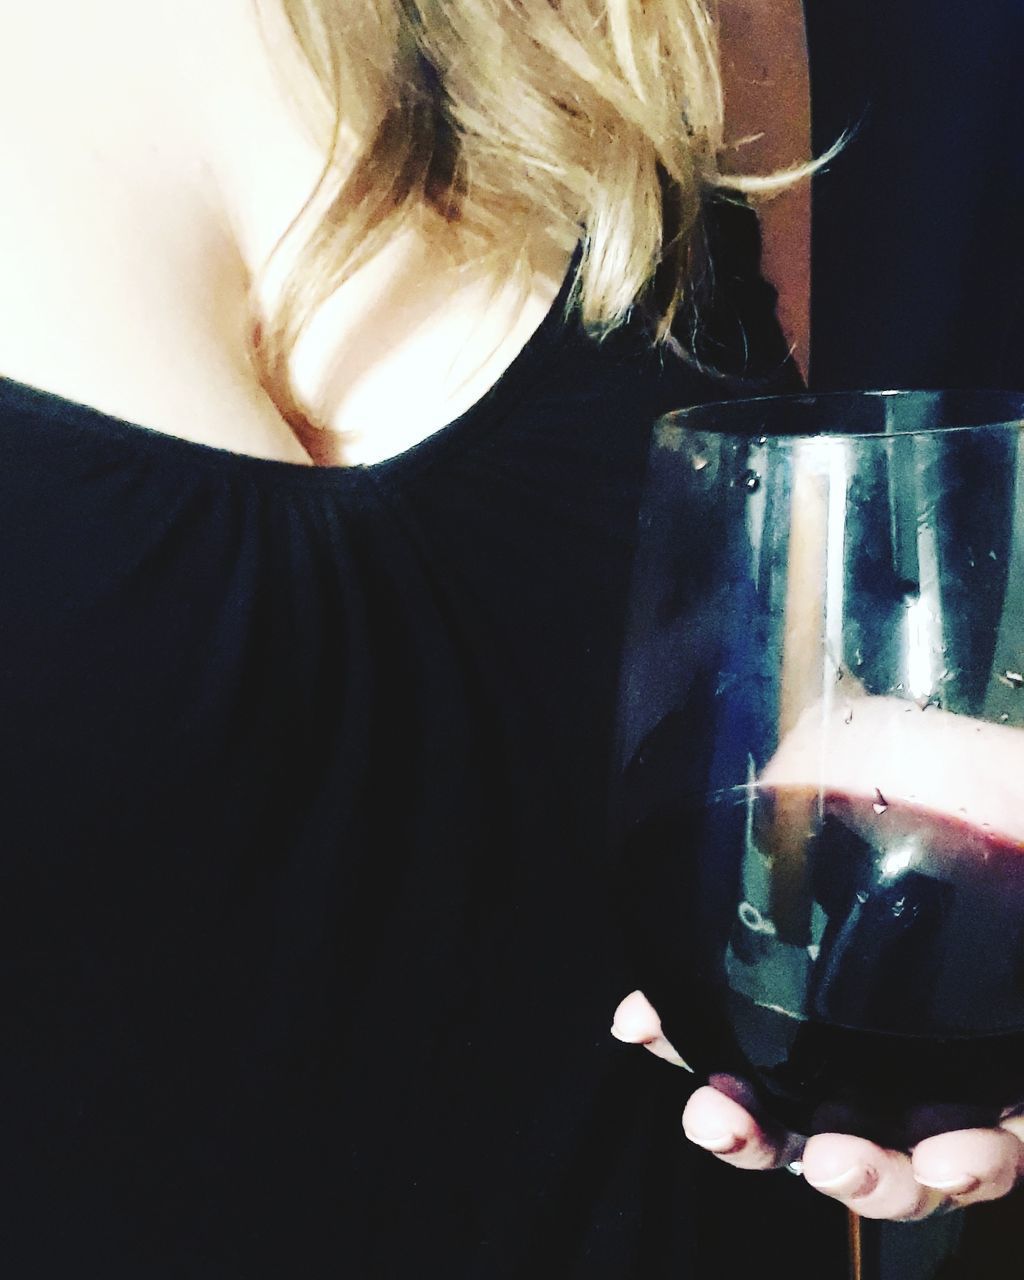 CLOSE-UP OF WOMAN HOLDING GLASS OF WINE